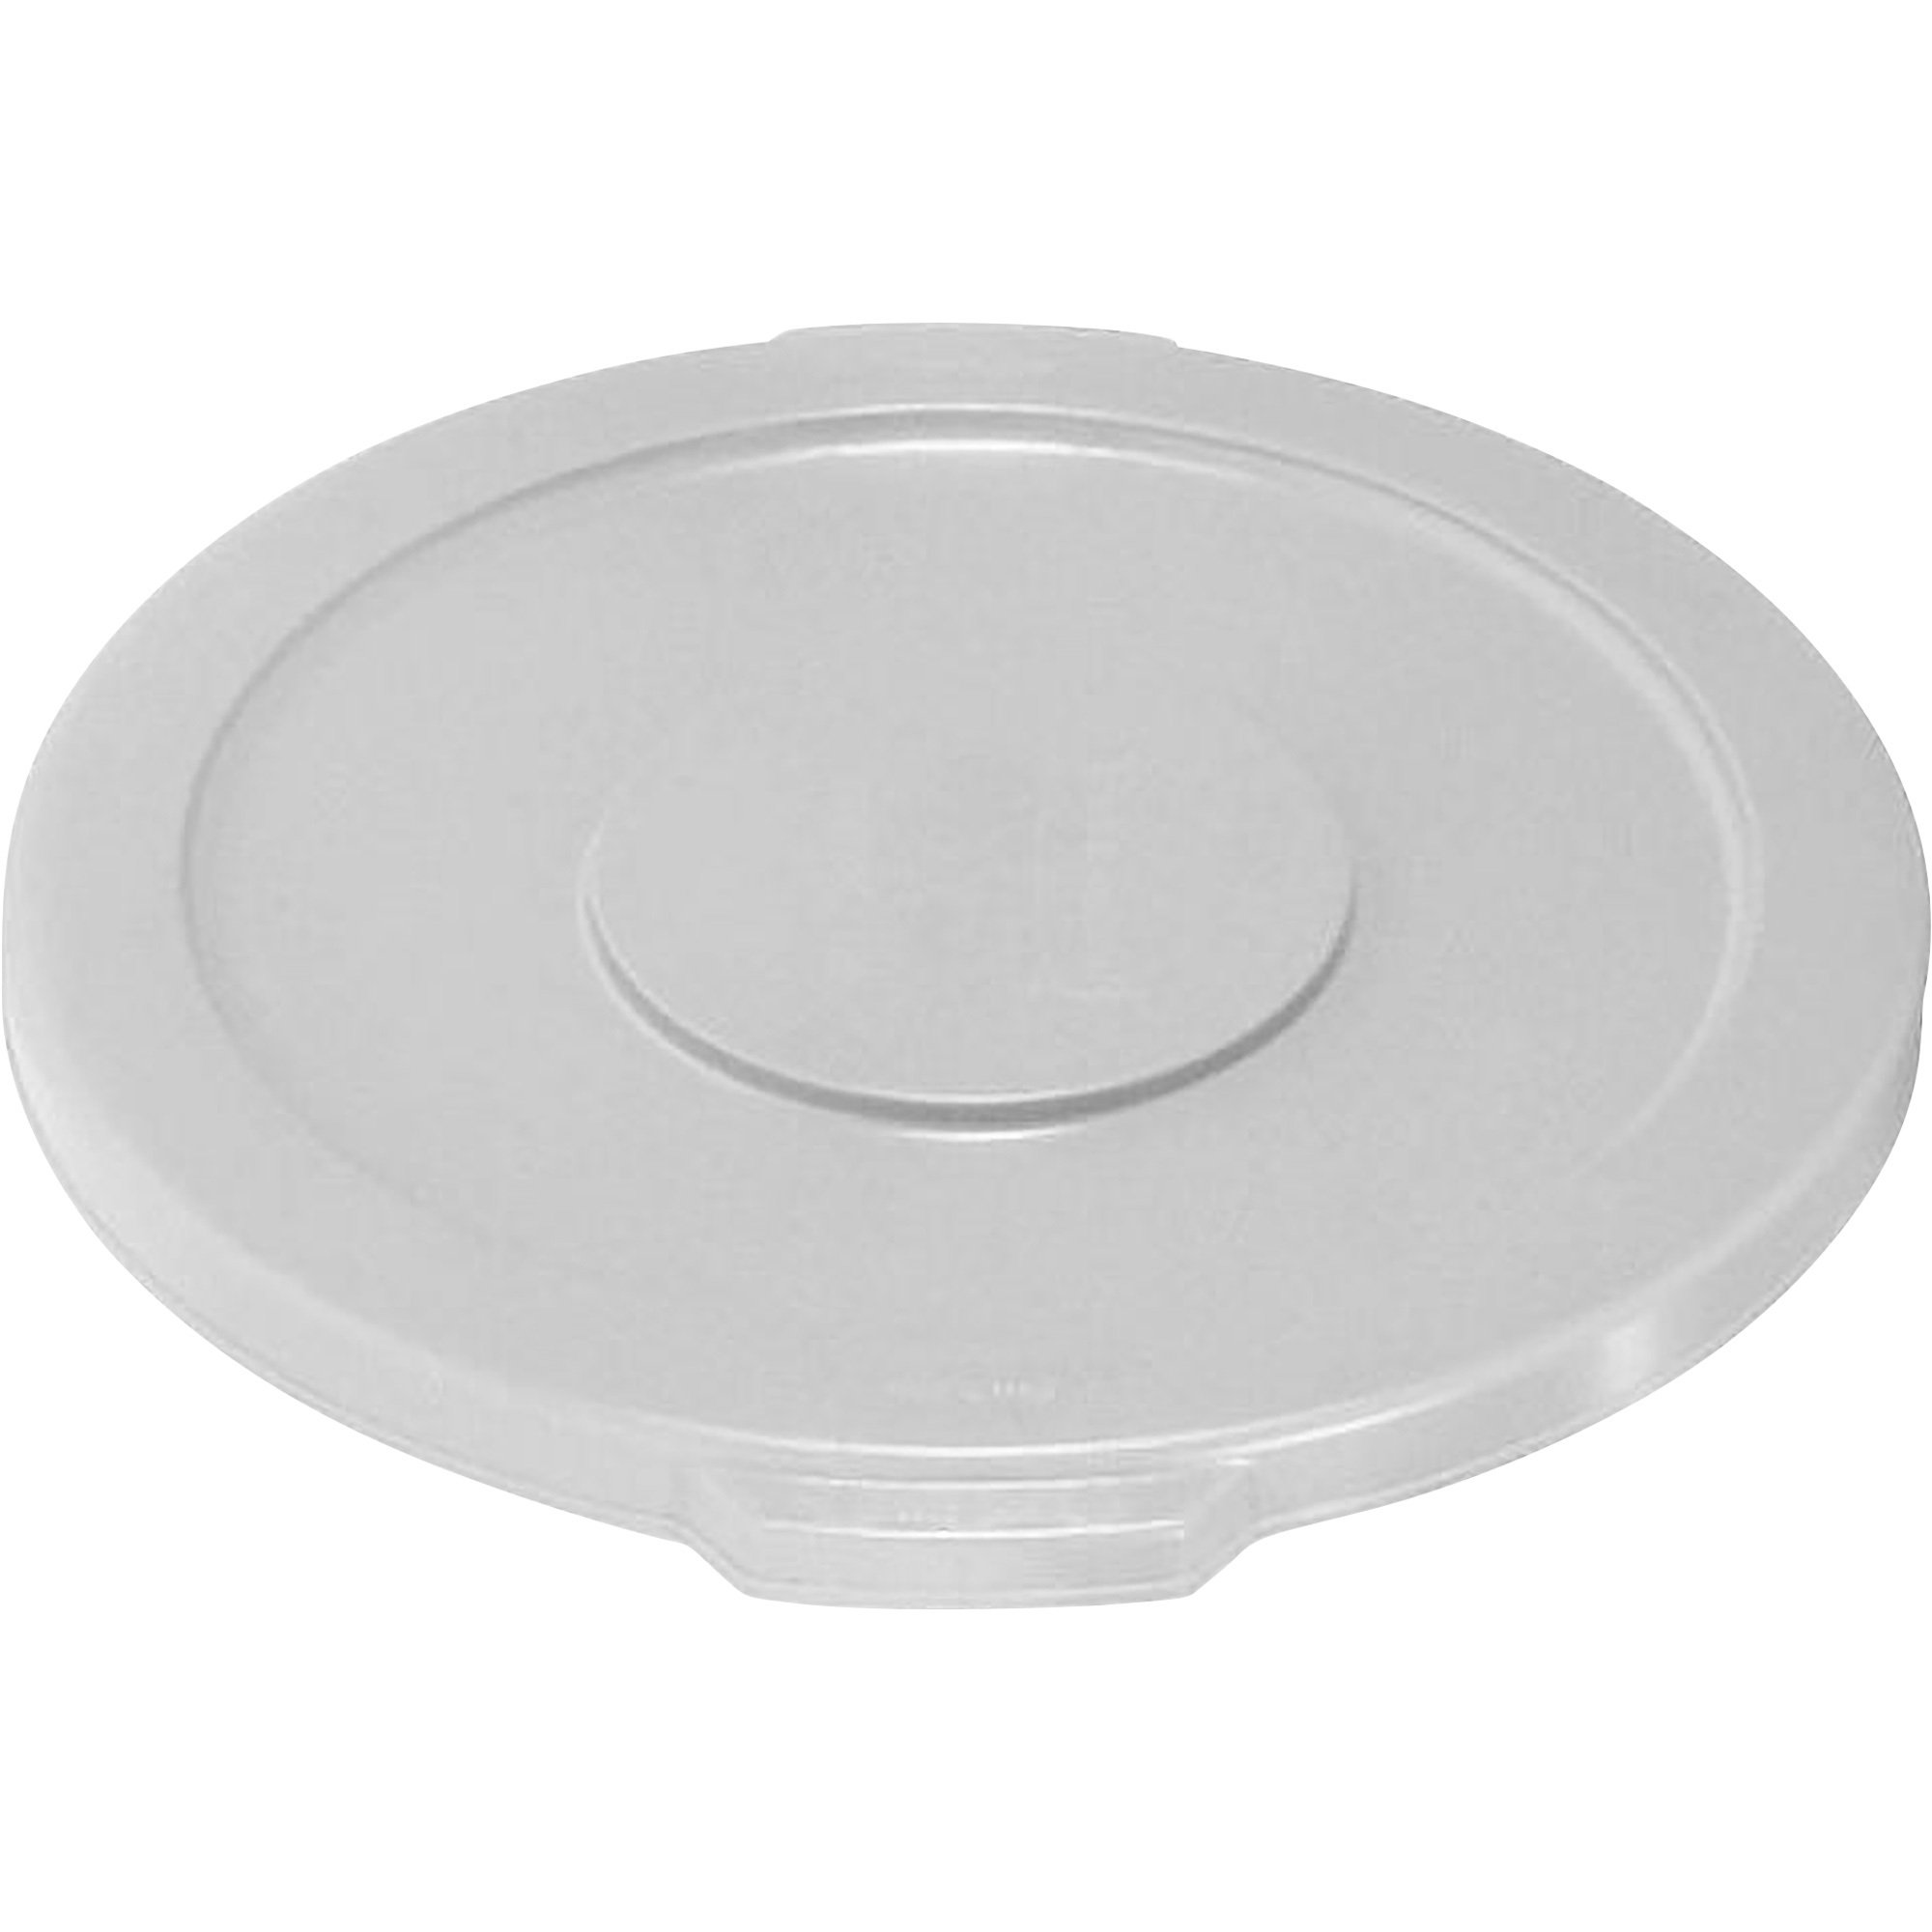 Replacement Lid for Rubbermaid 2848 Step On Trash Can - White - Viking  Janitor Supplies